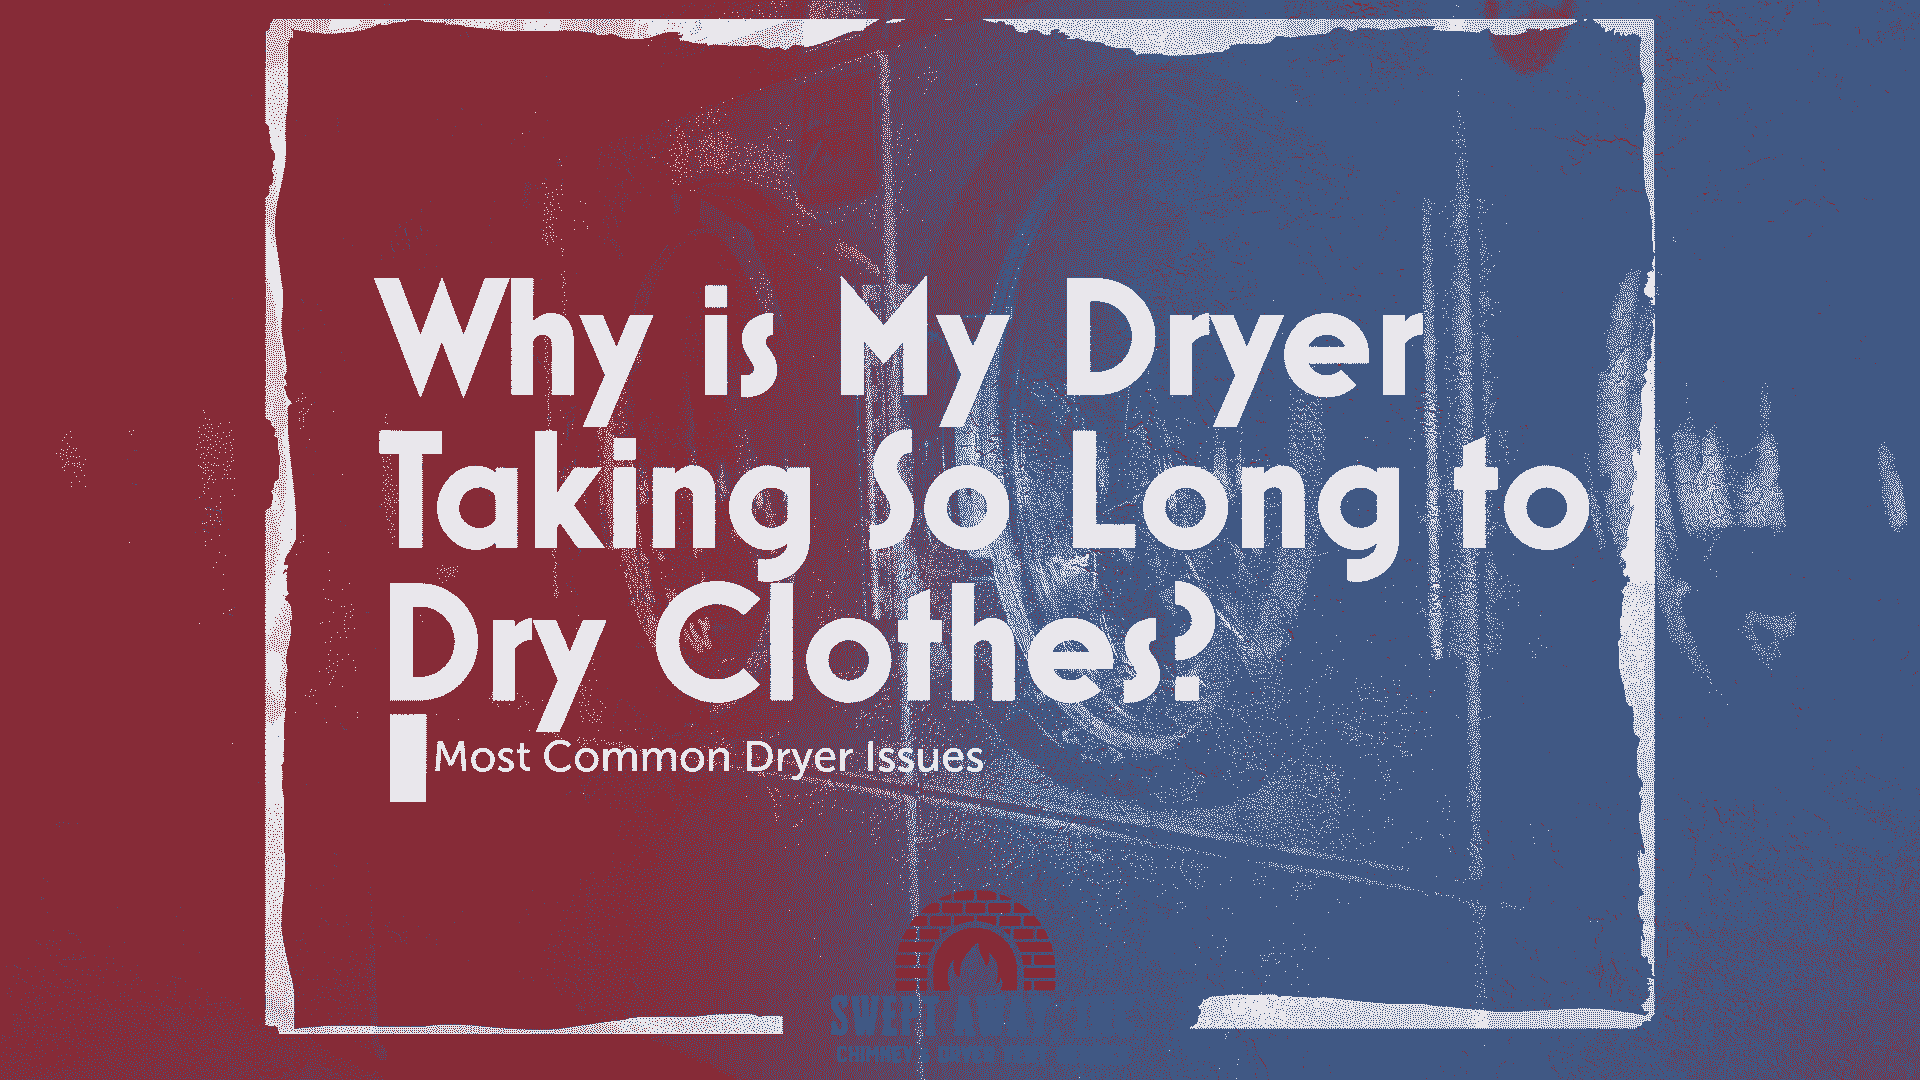 Why is My Dryer Taking So Long to Dry Clothes?